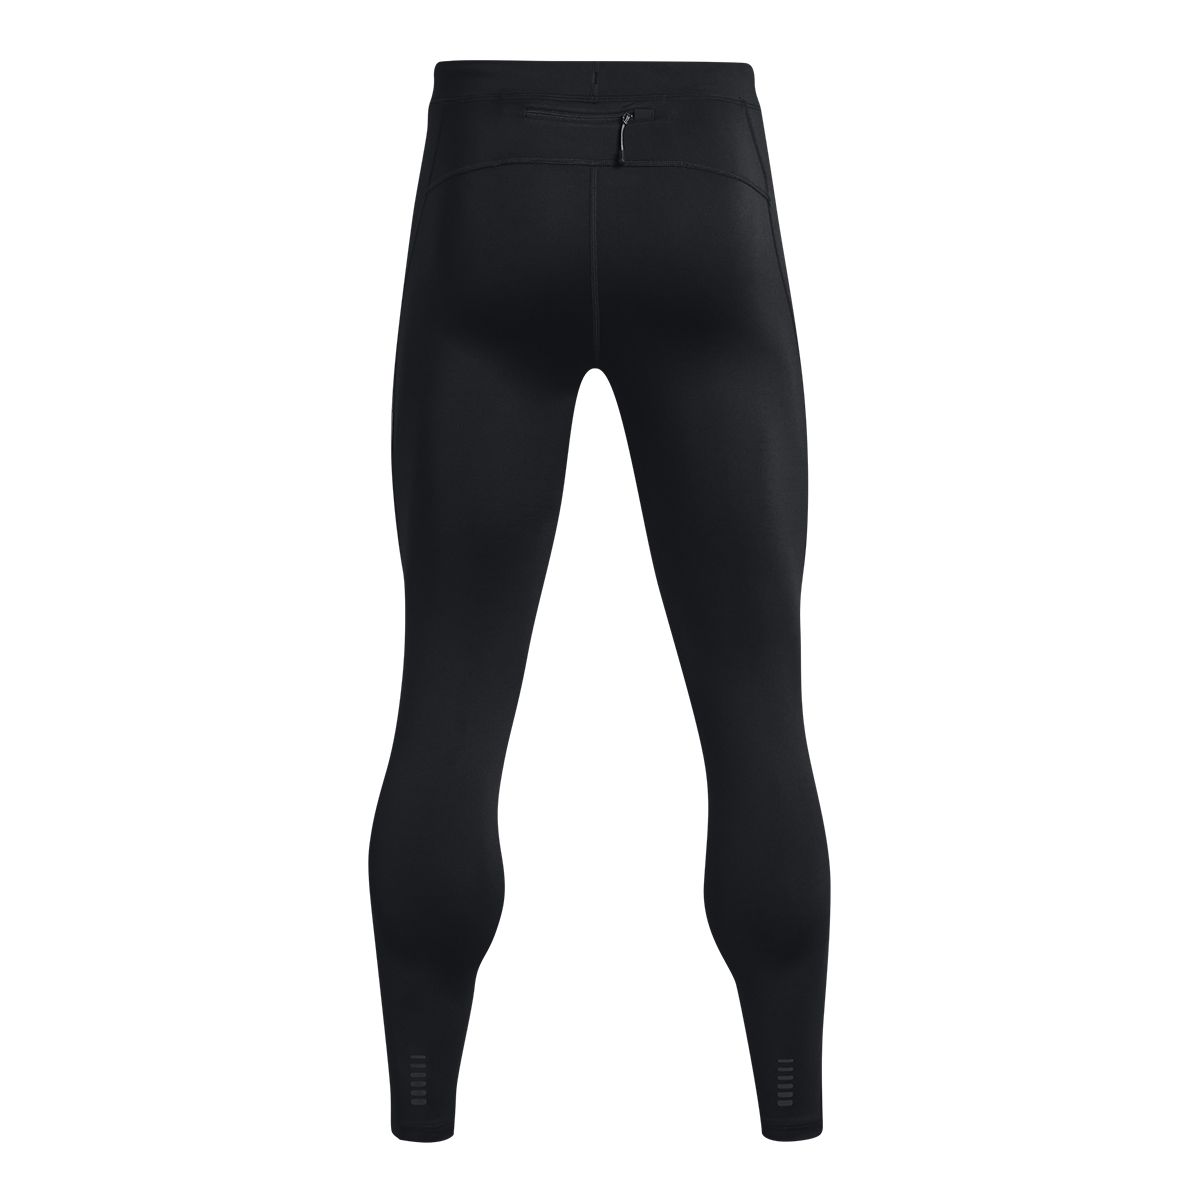 Under Armour Men's Fly Fast 3.0 Cold Tights